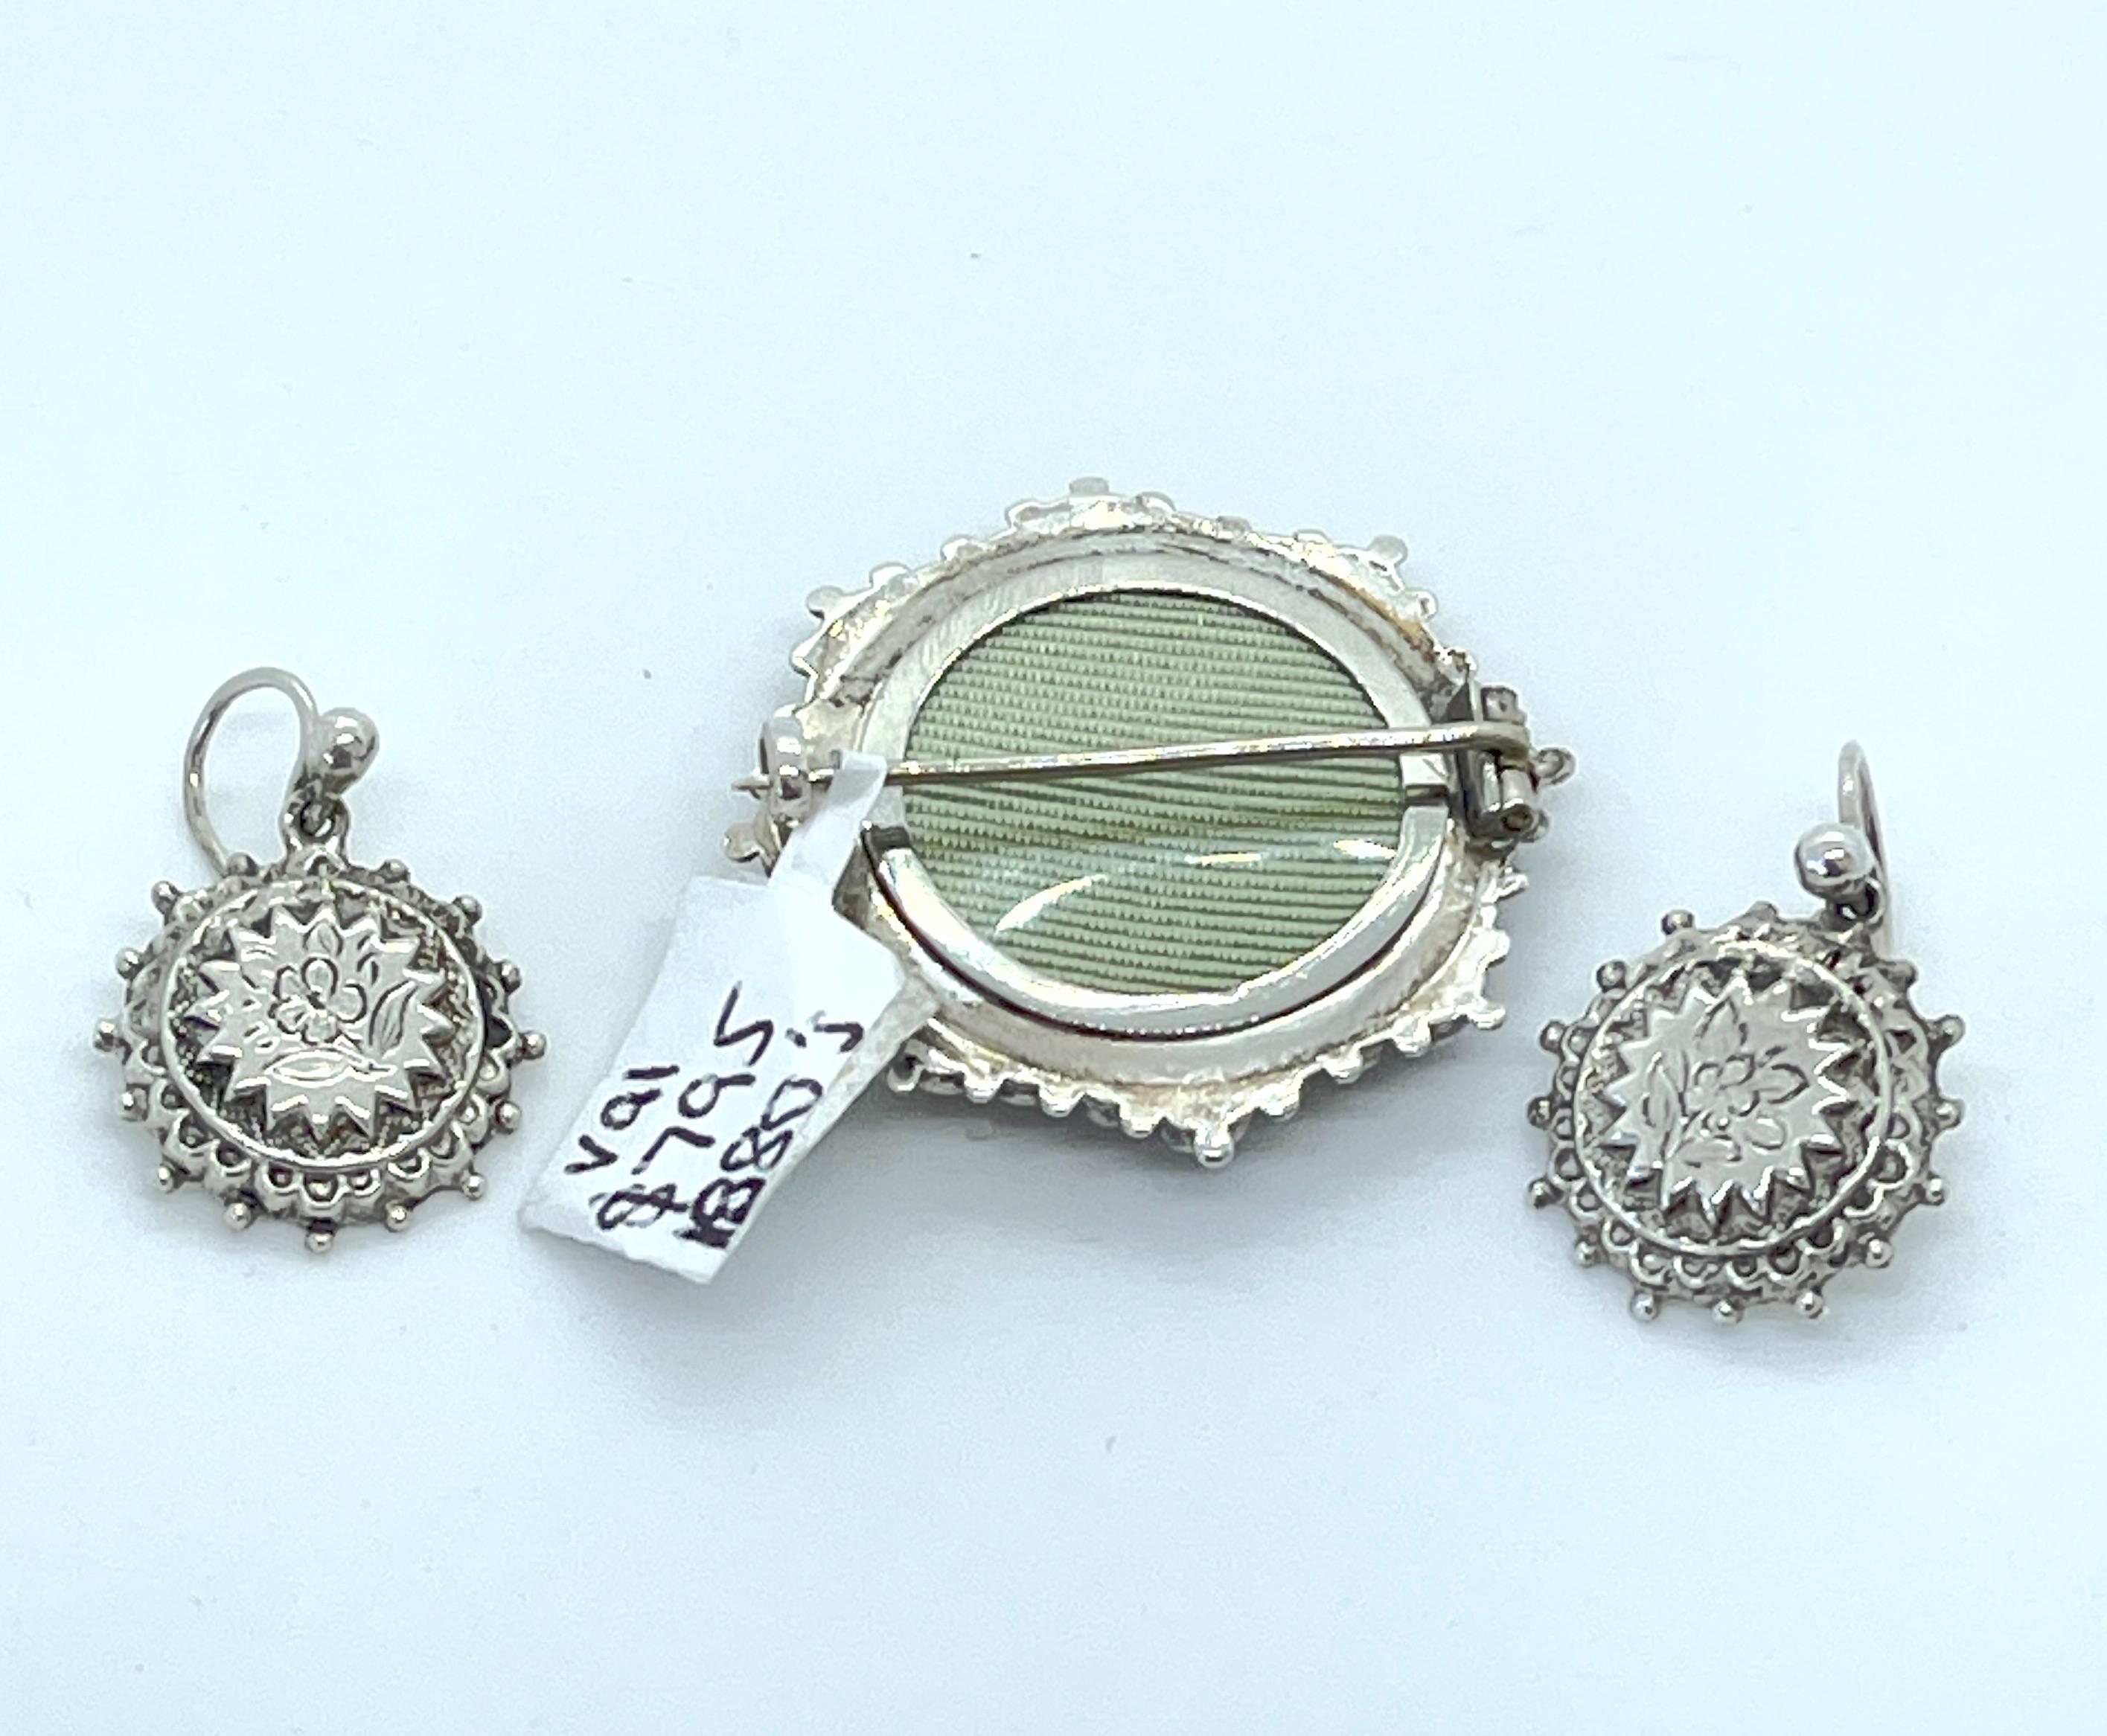 Victorian Sterling Silver Memorial Brooch Earring Set Original Box Circa 1880s  In Good Condition For Sale In Mona Vale, NSW